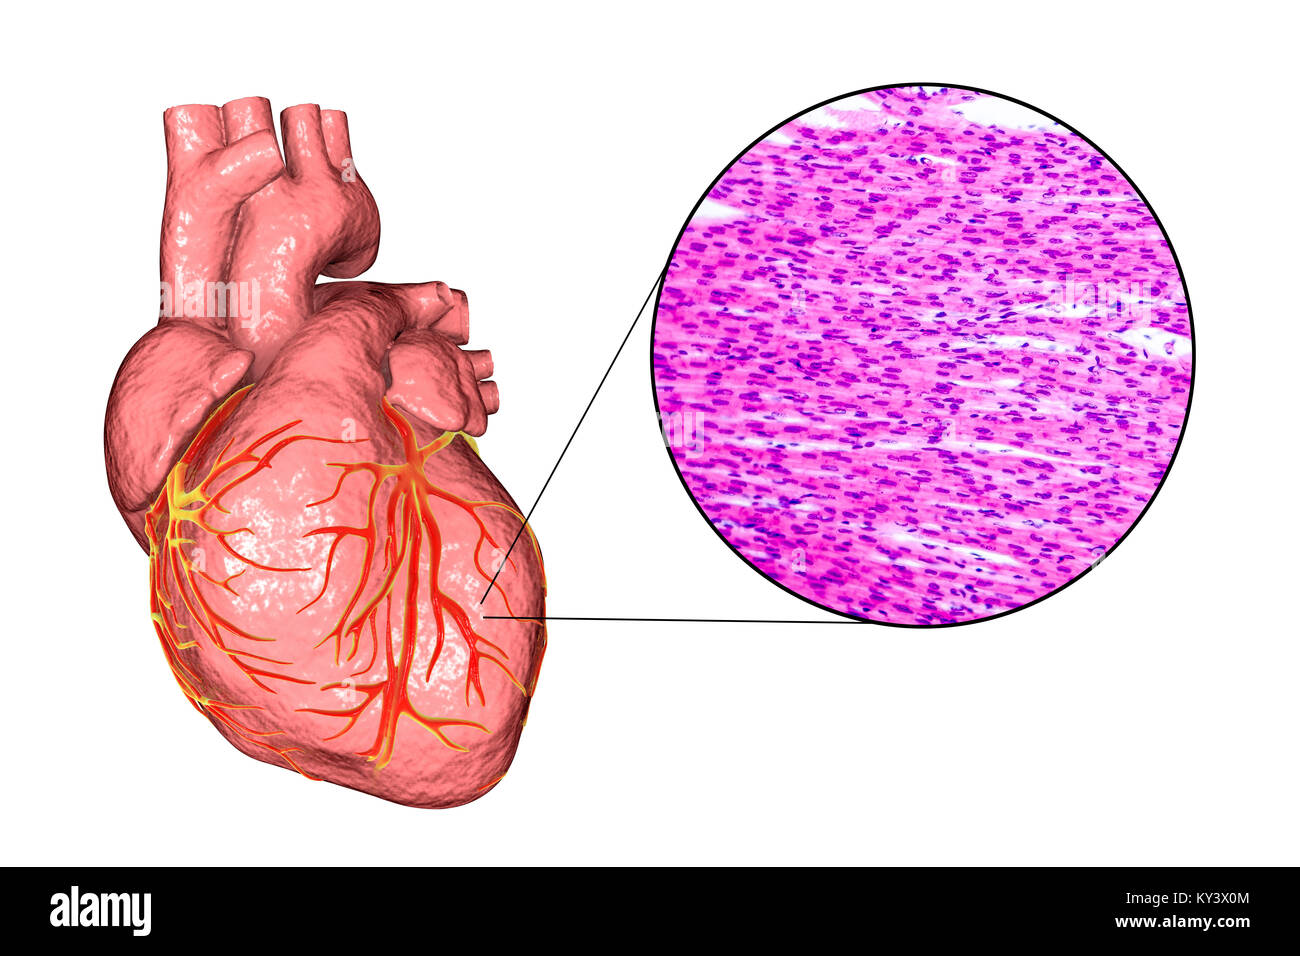 Computer illustration of a human heart and light micrograph of heart muscle. Heart muscle is composed of spindle-shaped cells grouped in irregular bundles. Boundaries between individual cells are faintly visible here. Each cell contains one nucleus, visible as a dark stained spot. Cardiac muscle is a specialised muscle tissue that can contract regularly and continuously without tiring. Stock Photo